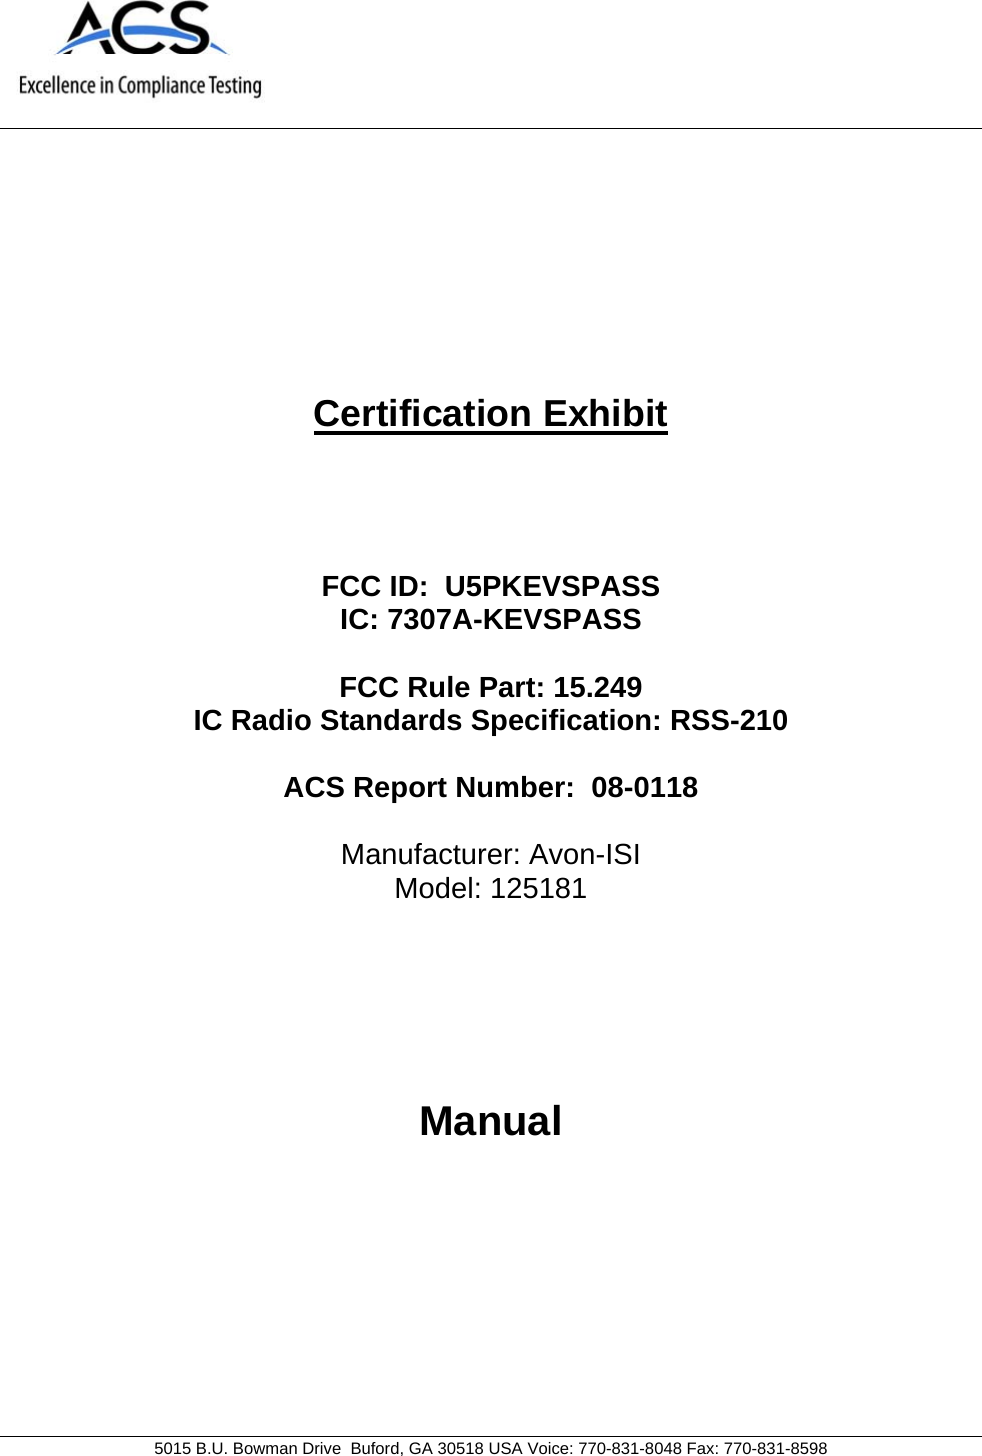     5015 B.U. Bowman Drive  Buford, GA 30518 USA Voice: 770-831-8048 Fax: 770-831-8598   Certification Exhibit     FCC ID:  U5PKEVSPASS IC: 7307A-KEVSPASS  FCC Rule Part: 15.249 IC Radio Standards Specification: RSS-210  ACS Report Number:  08-0118   Manufacturer: Avon-ISI Model: 125181     Manual  